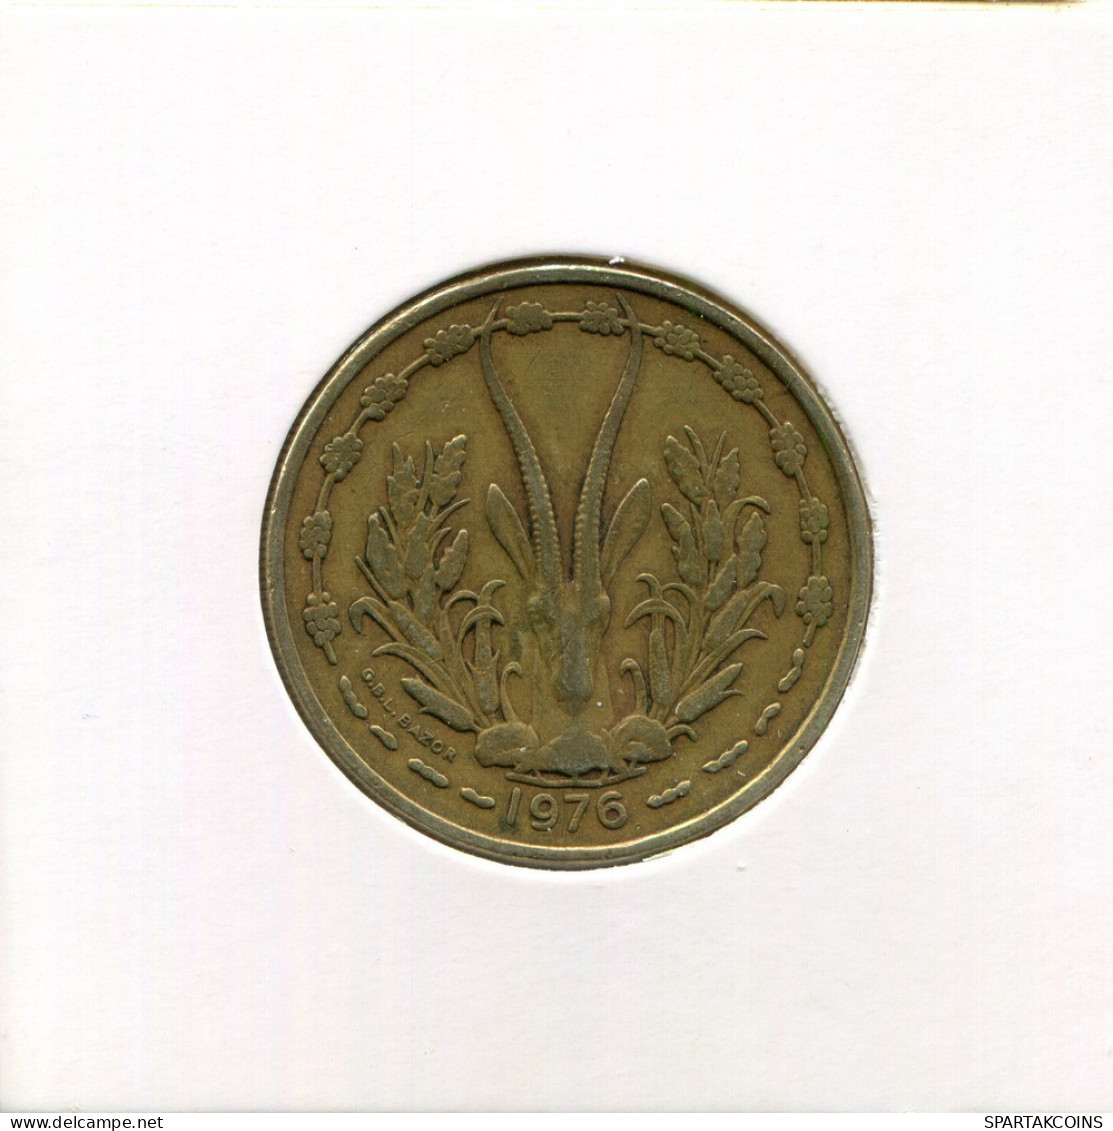 25 FRANCS 1976 WESTERN AFRICAN STATES Moneda #AR391.E.A - Other - Africa